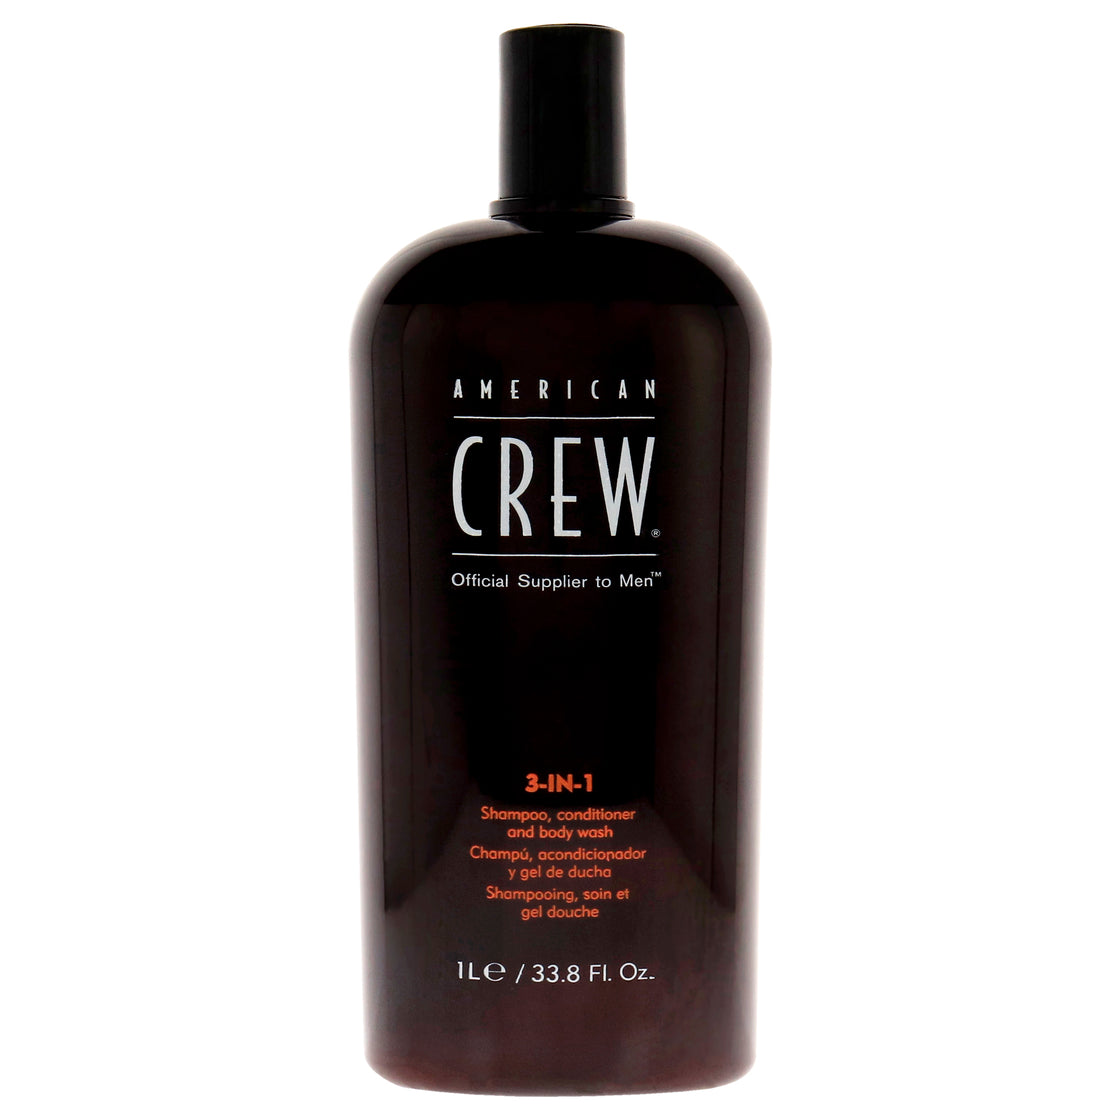 3 In 1 Shampoo, Conditioner and Body Wash by American Crew for Men - 33.8 oz Shampoo, Conditioner and Body Wash